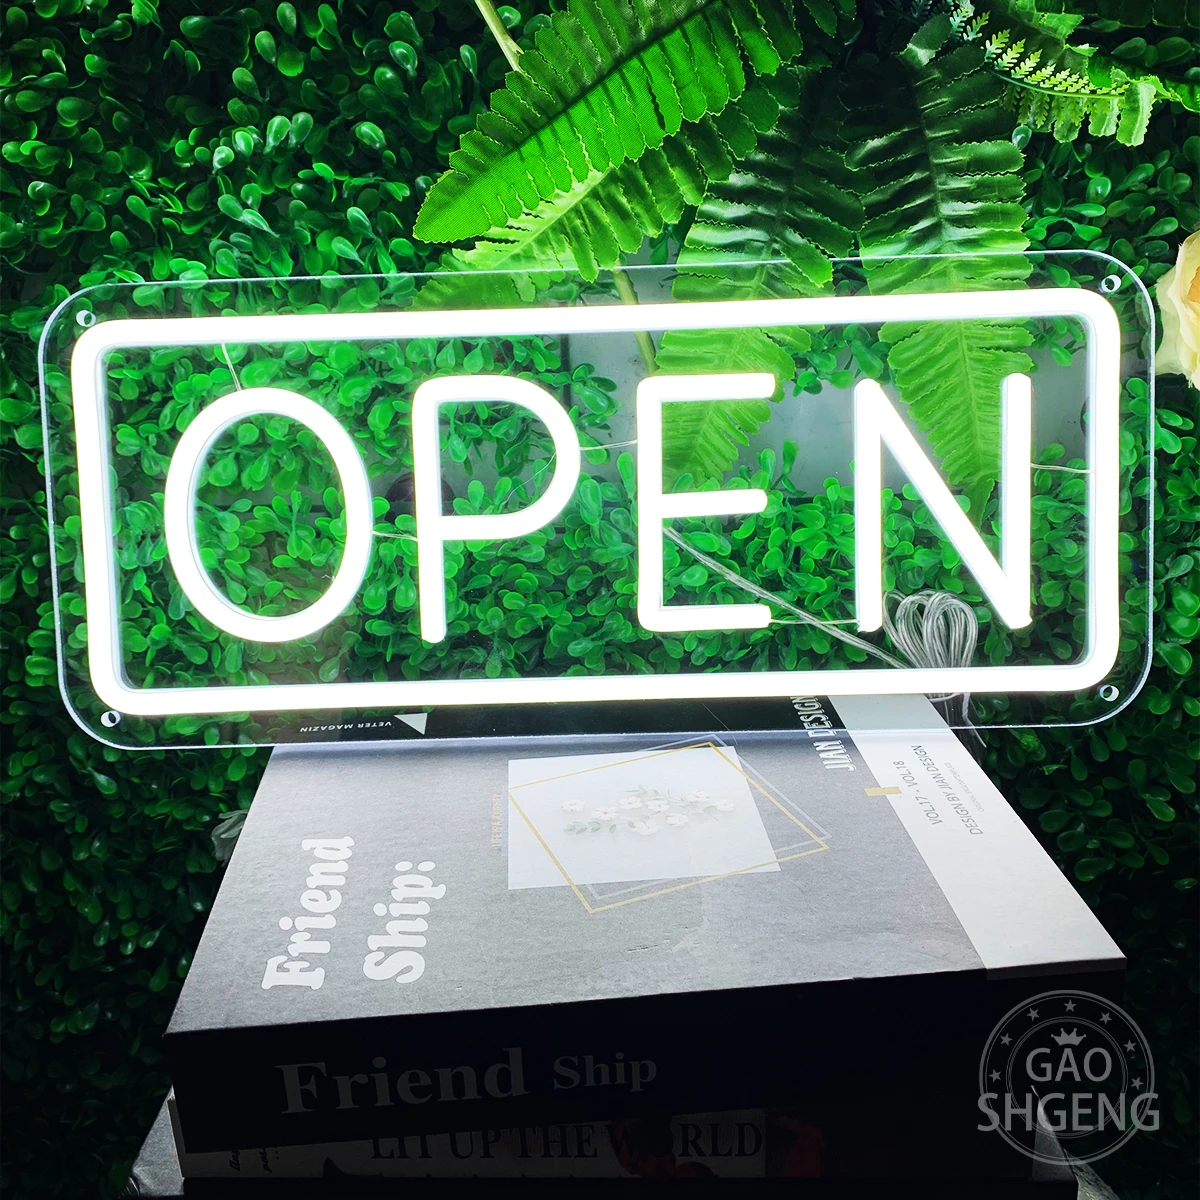 

Open neon custom applies store opening signs decorated with neon signs to create an atmosphere to make the store more attractive